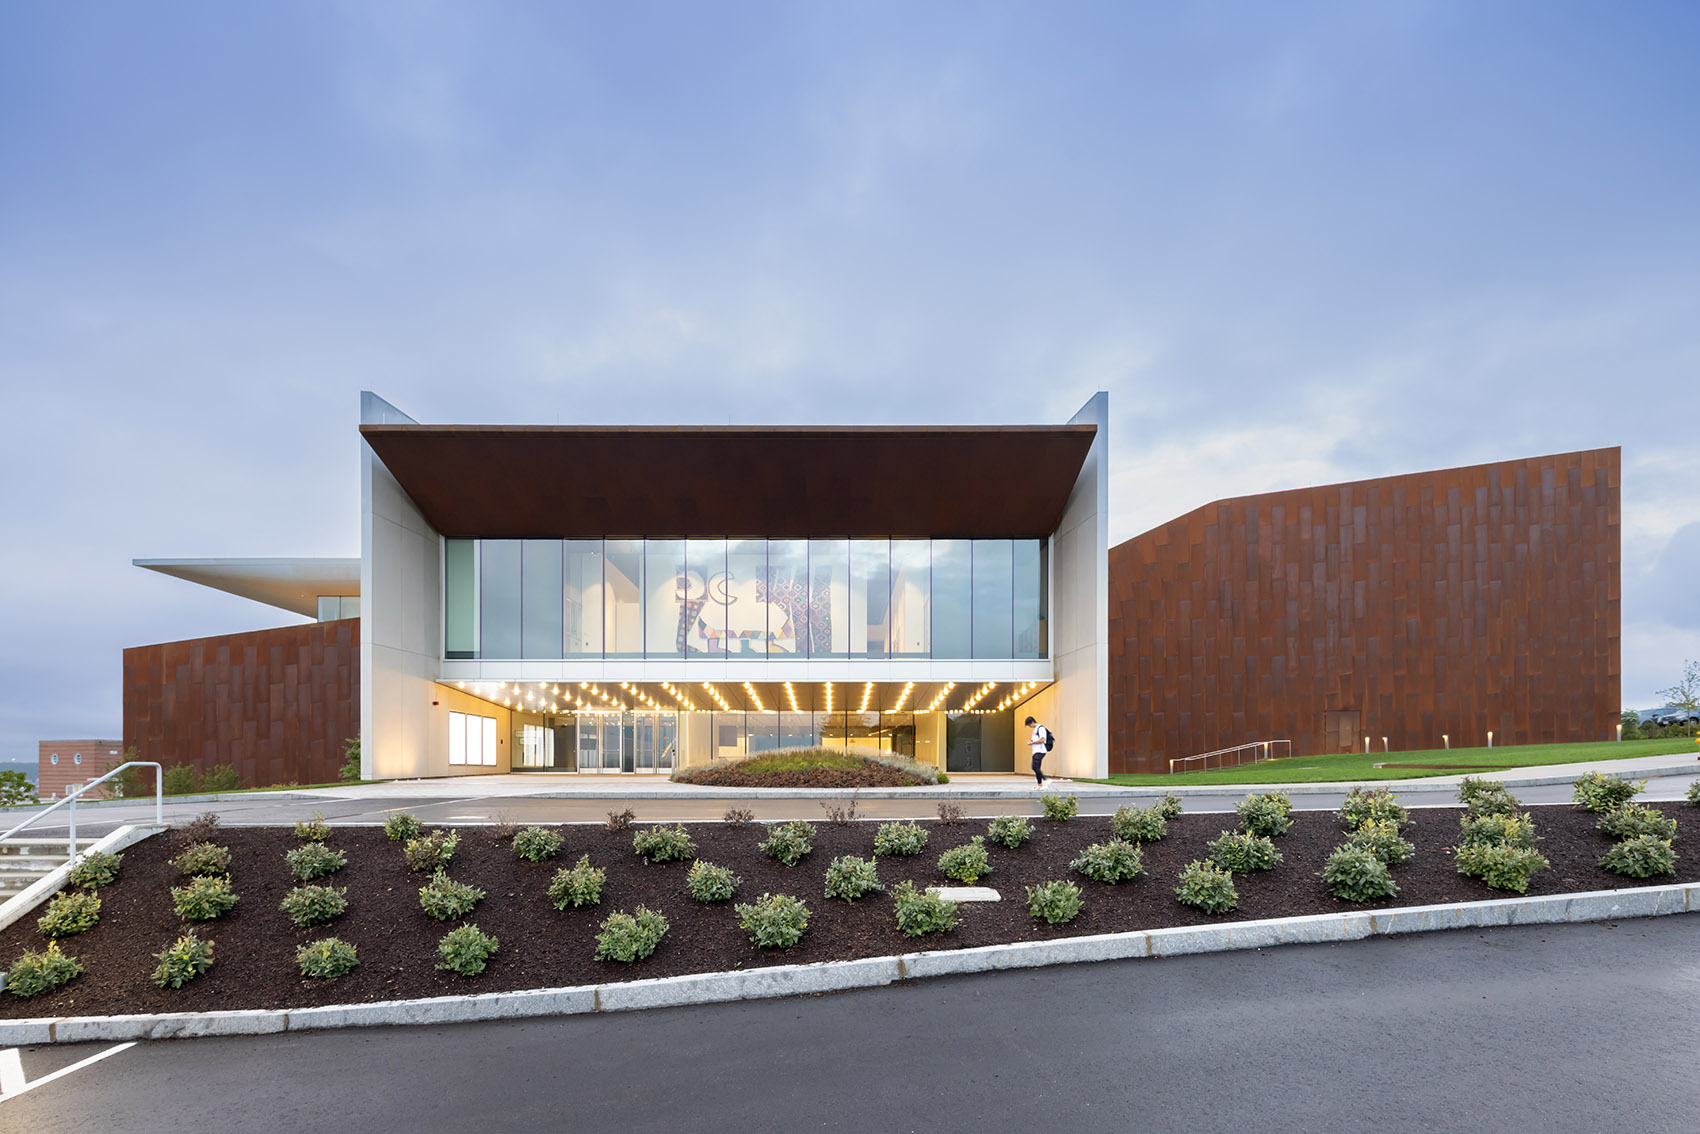 College of the Holy Cross Prior Performing Arts Center by Diller